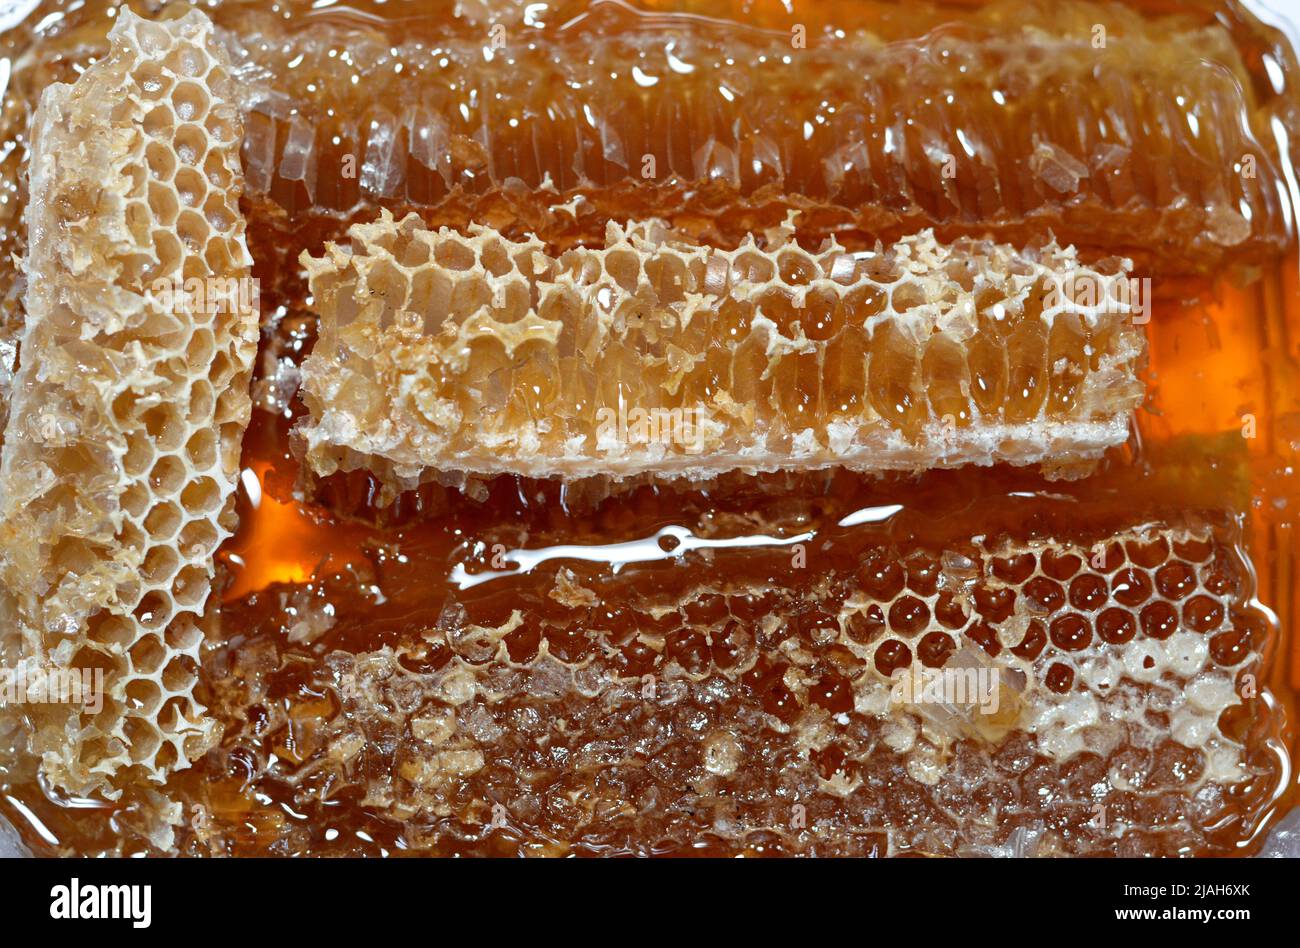 Hexagonal honeycomb cells with honey that hold the queen bee's eggs and store the pollen and honey the worker bees bring to the hive, mass of prismati Stock Photo